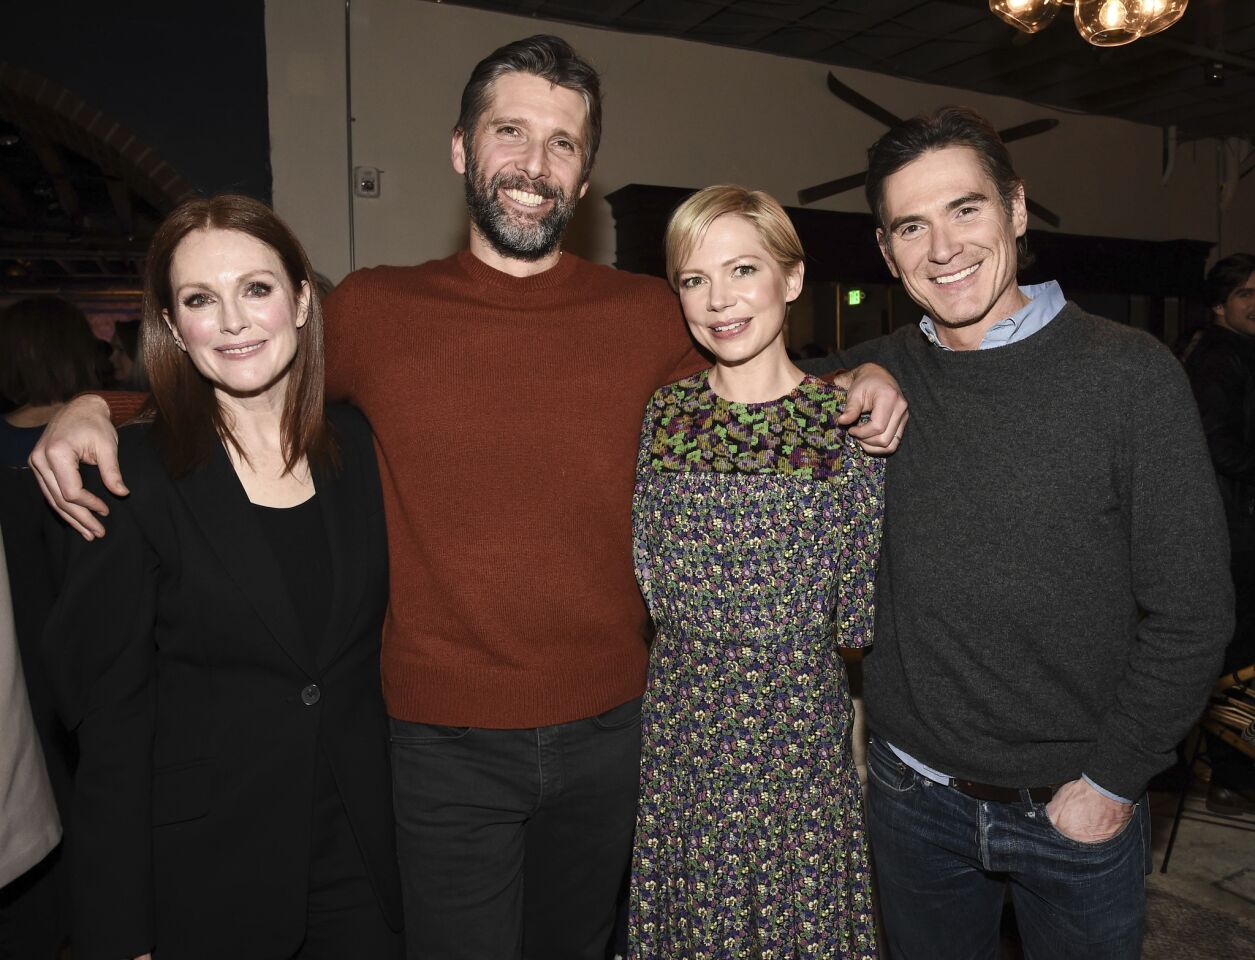 Actress Julianne Moore, left, director Bart Freundlich, actress Michelle Williams and actor Billy Crudup at the "After the Wedding" after-party on Friday at the Sundance Film Festival in Park City, Utah.